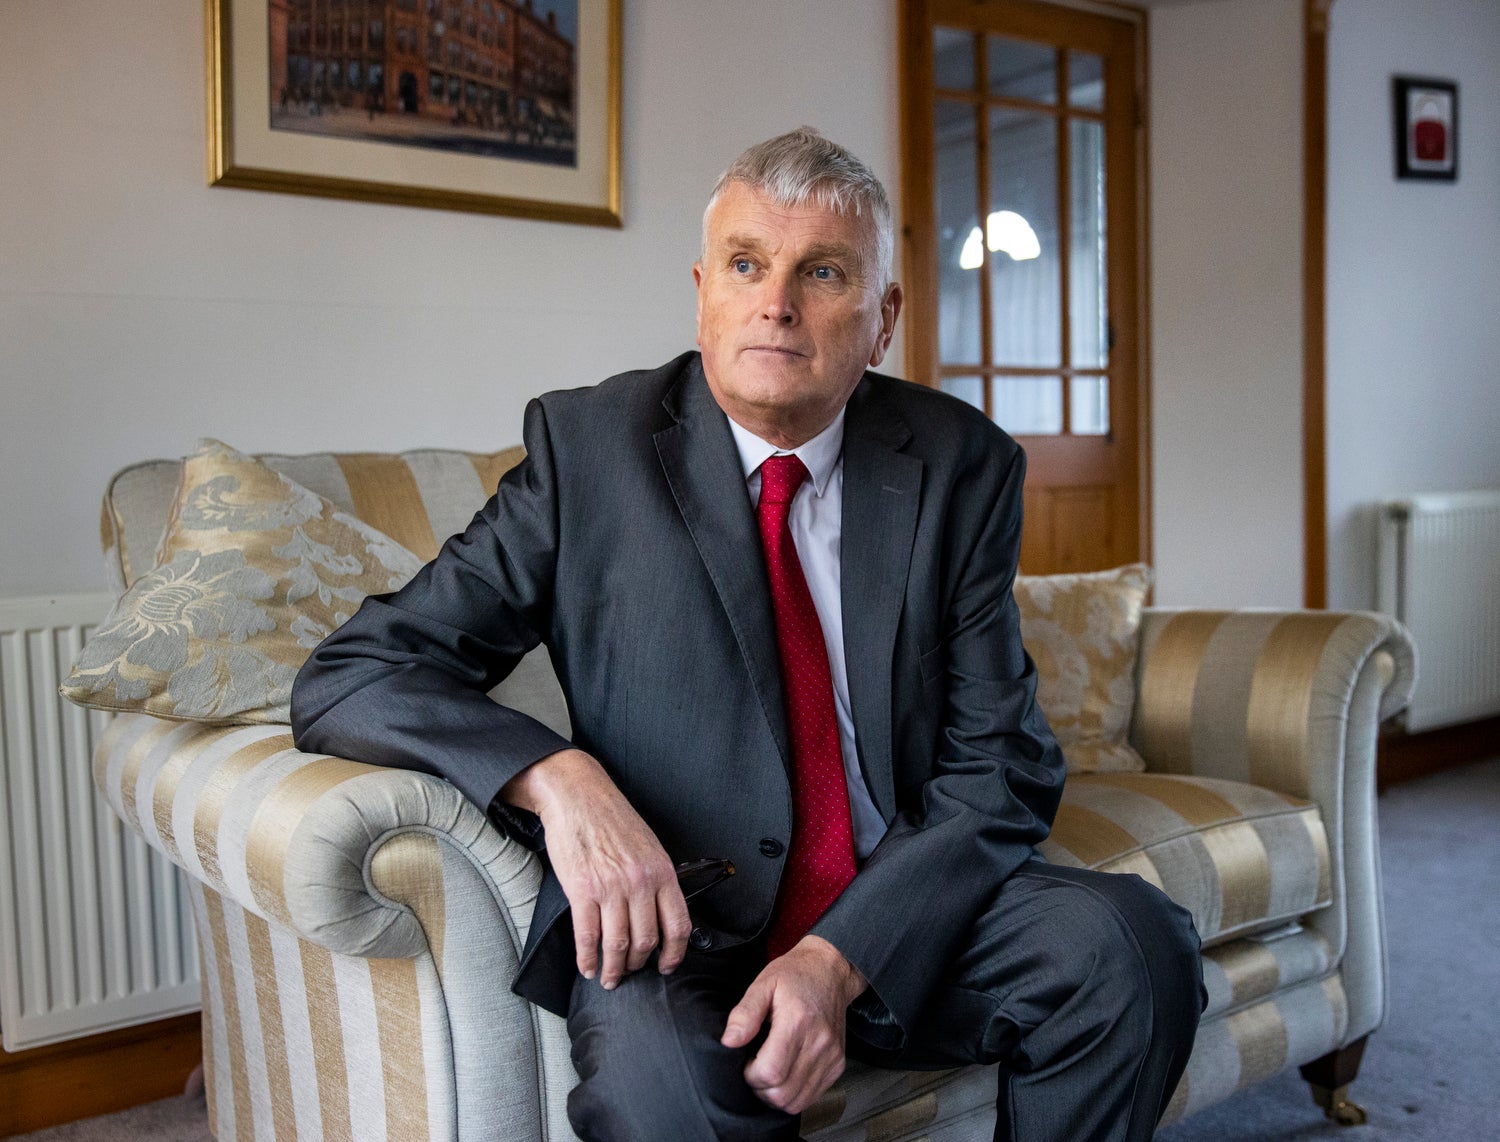 Jim Wells, DUP MLA for south Down, during an interview where he talks of being deselected by the party’s as a candidate for the upcoming May Northern Ireland Assembly elections (Liam McBurney/PA)